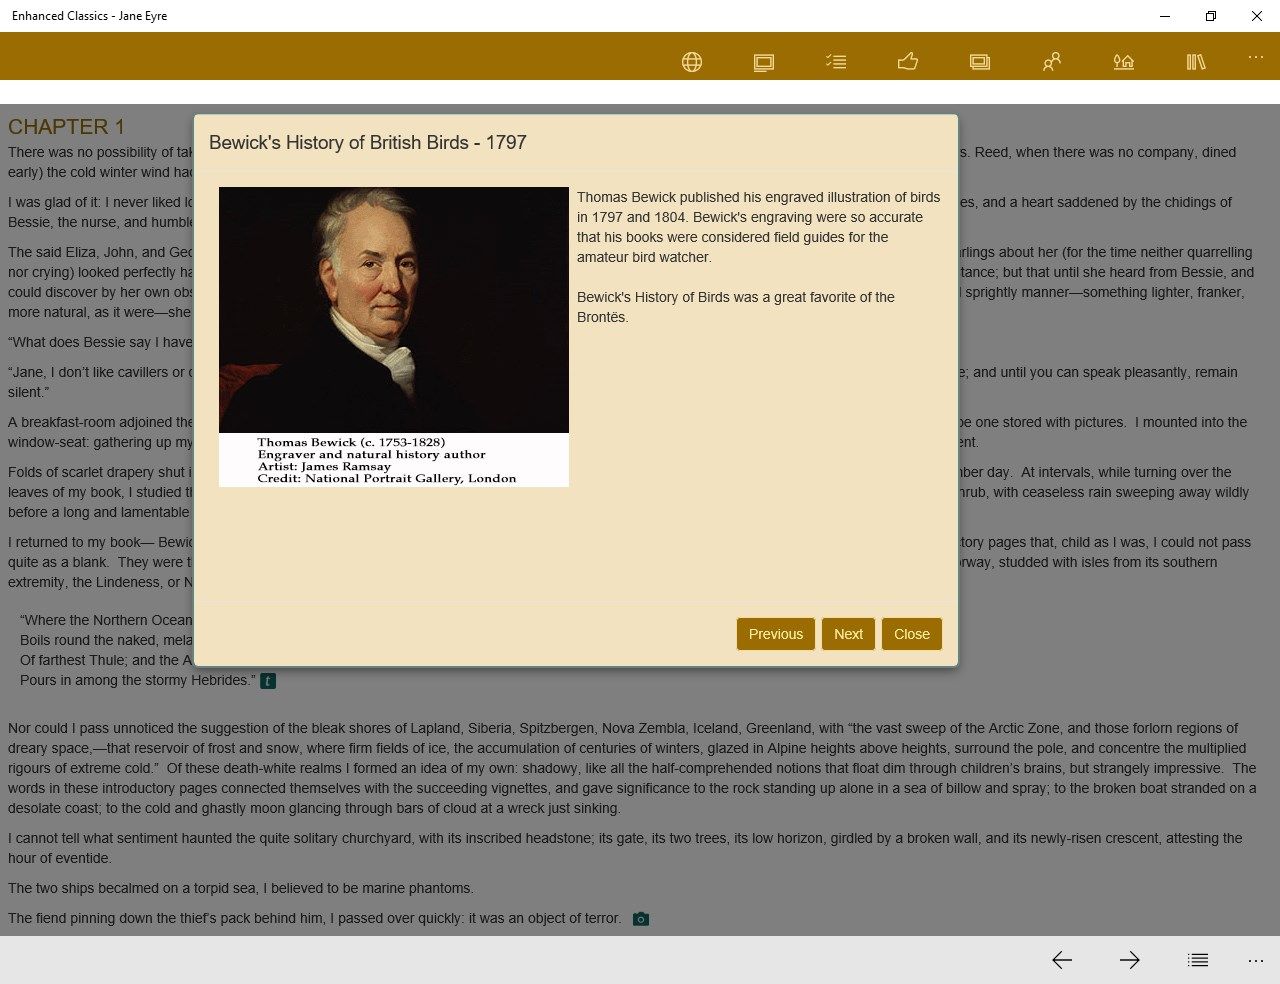 Popups give additional information and insights into the novel